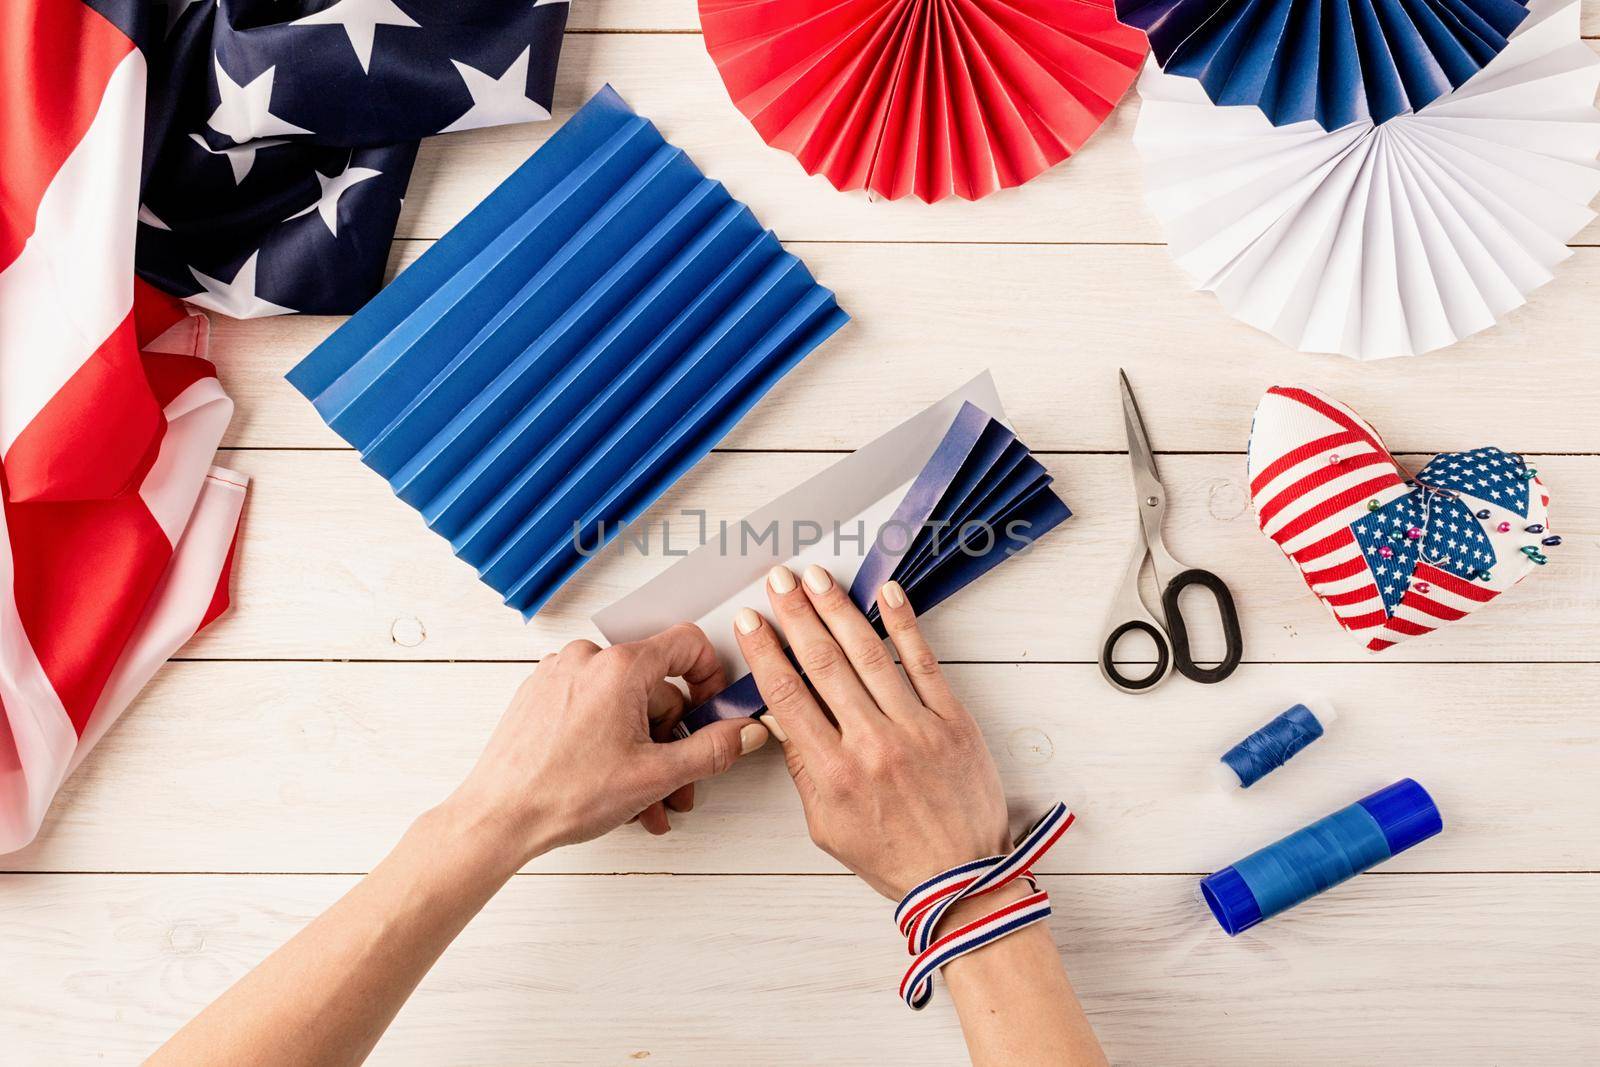 Gift idea, decor July 4, USA Independence Day. Step by step tutorial DIY craft. Making colorful paper fans, step 3 - folding the rest of paper. Flat lay top view